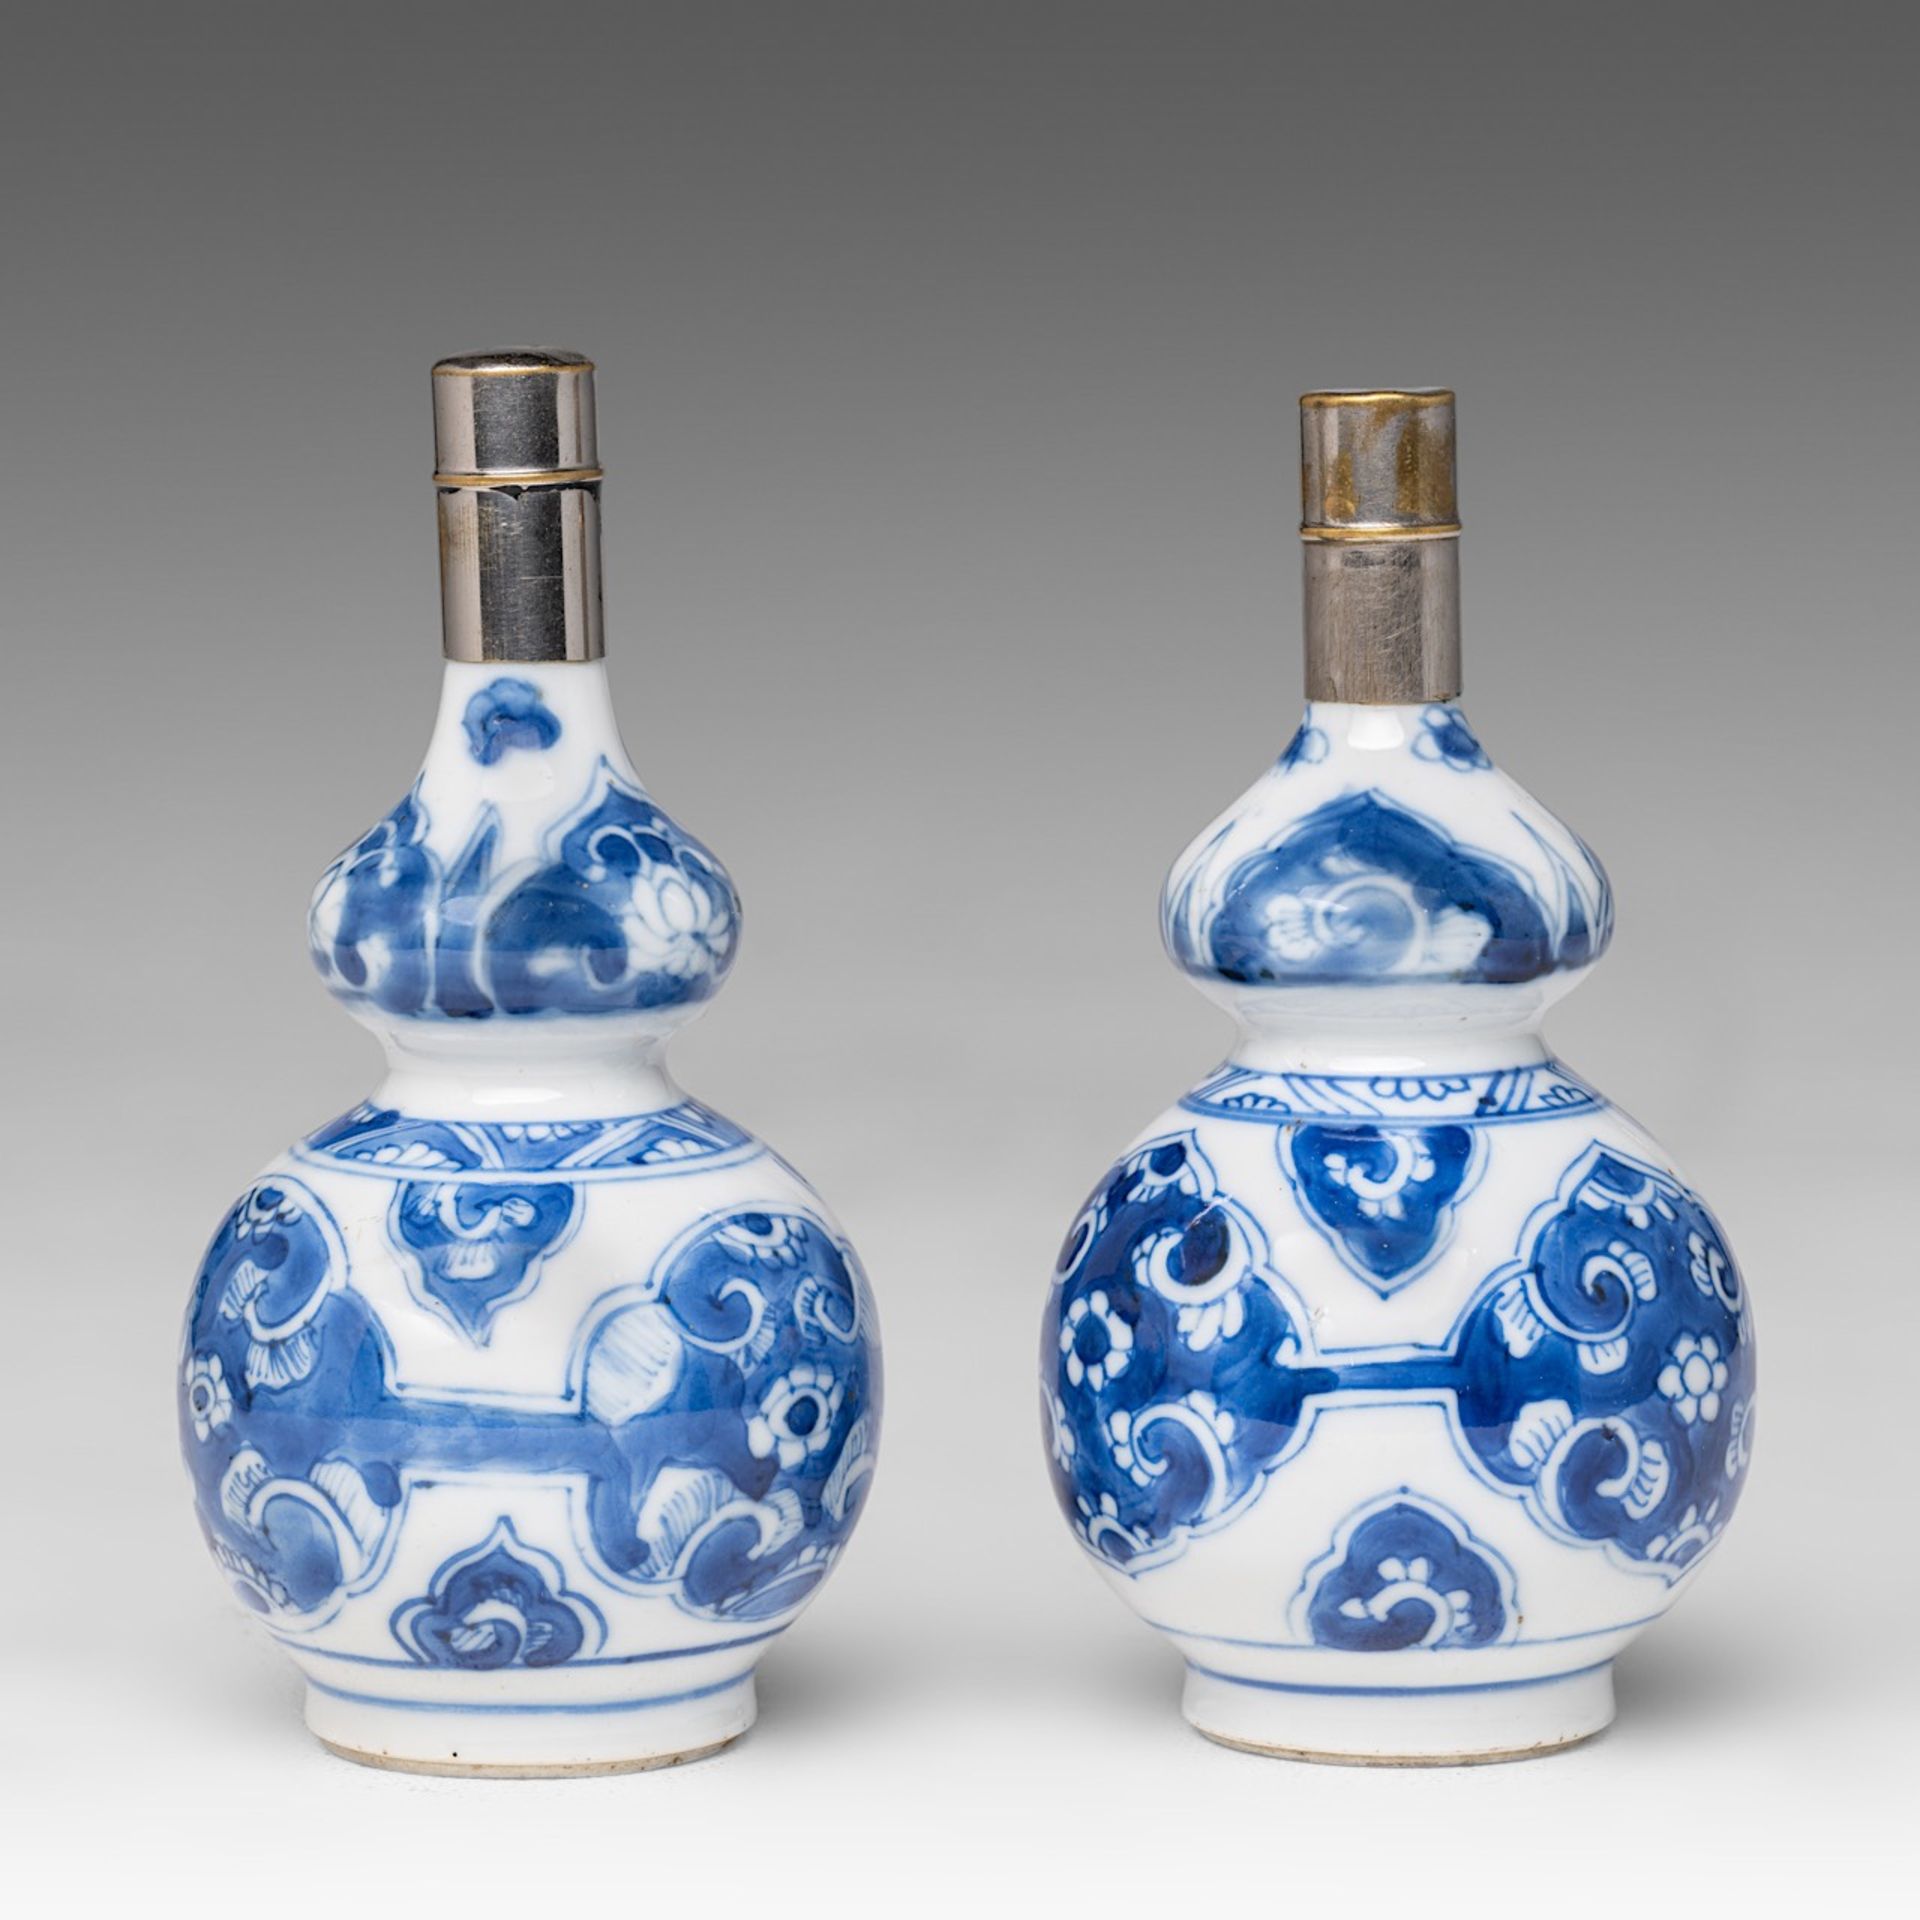 Two Chinese blue and white floral decorated double gourd vases, Kangxi period, H 13 cm - Image 2 of 6